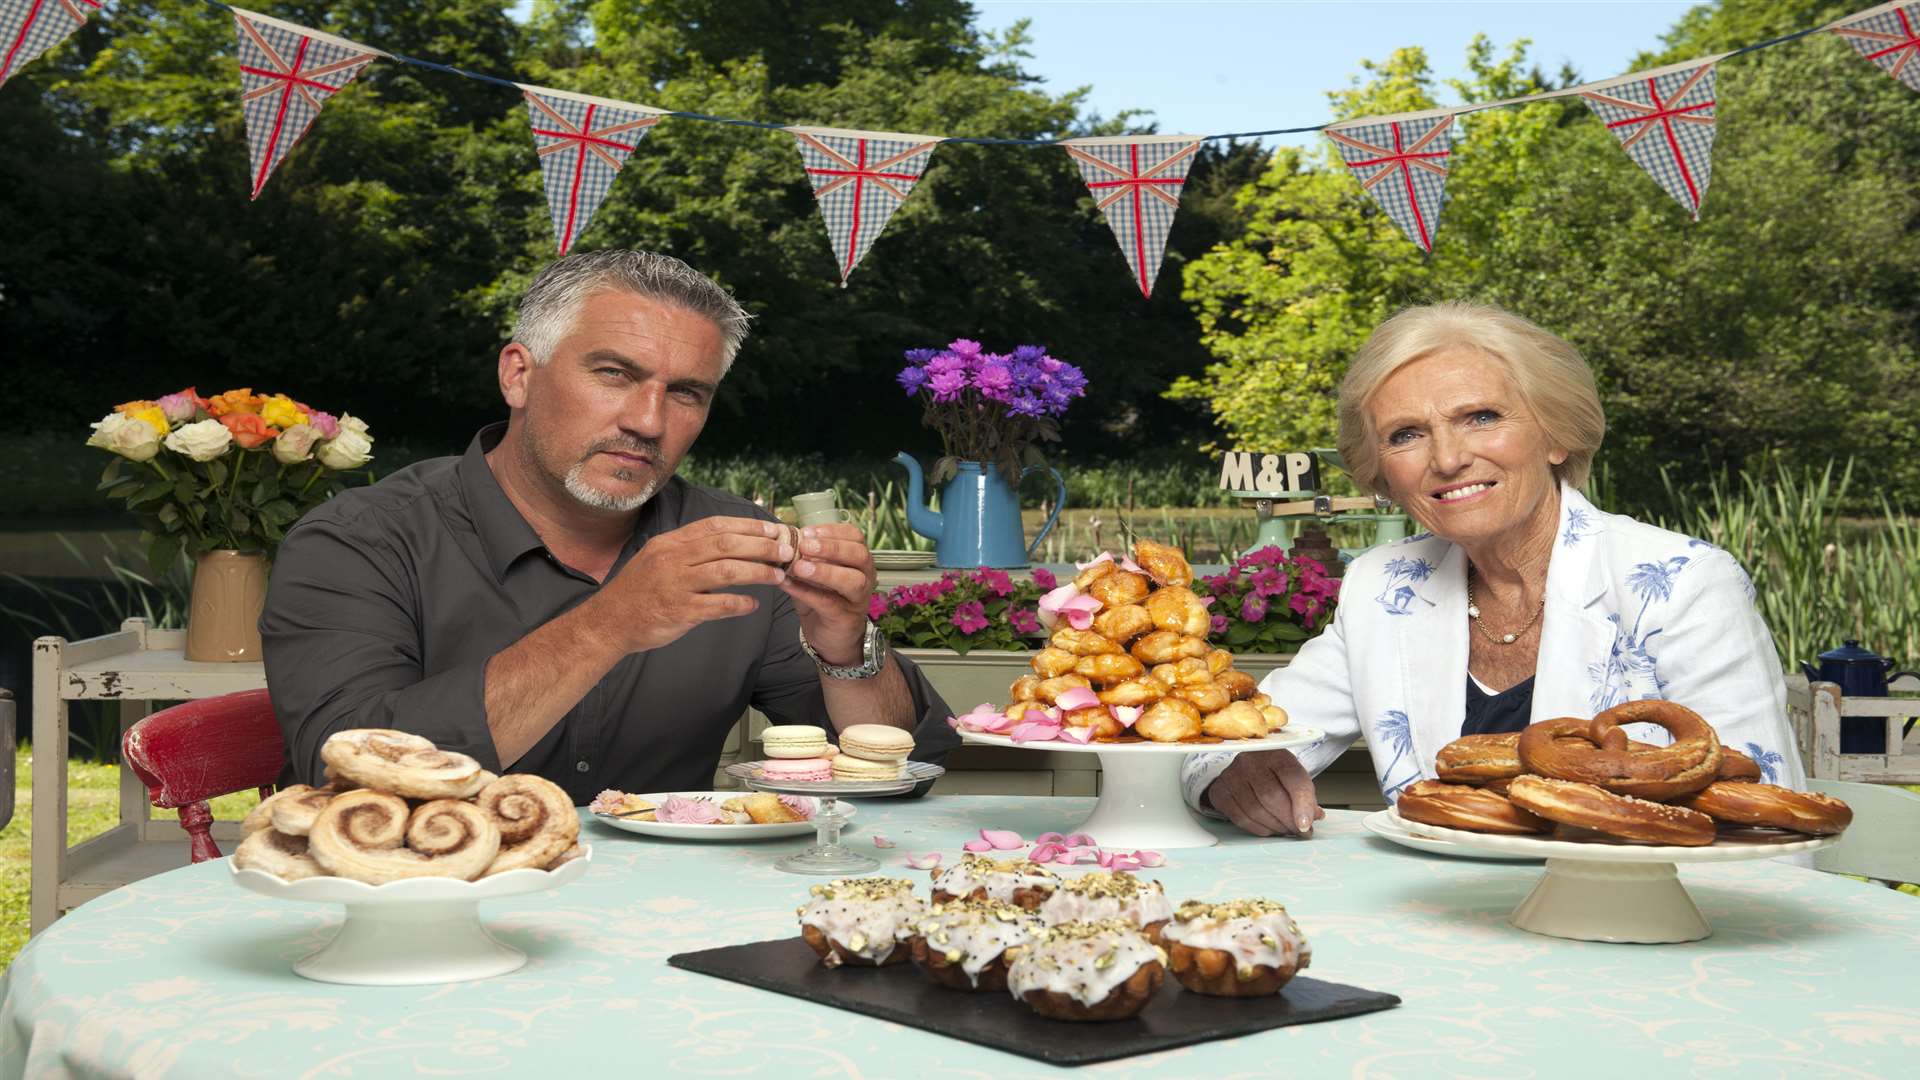 Great British Bake Off judge Paul Hollywood with Mary Berry, who has left the show